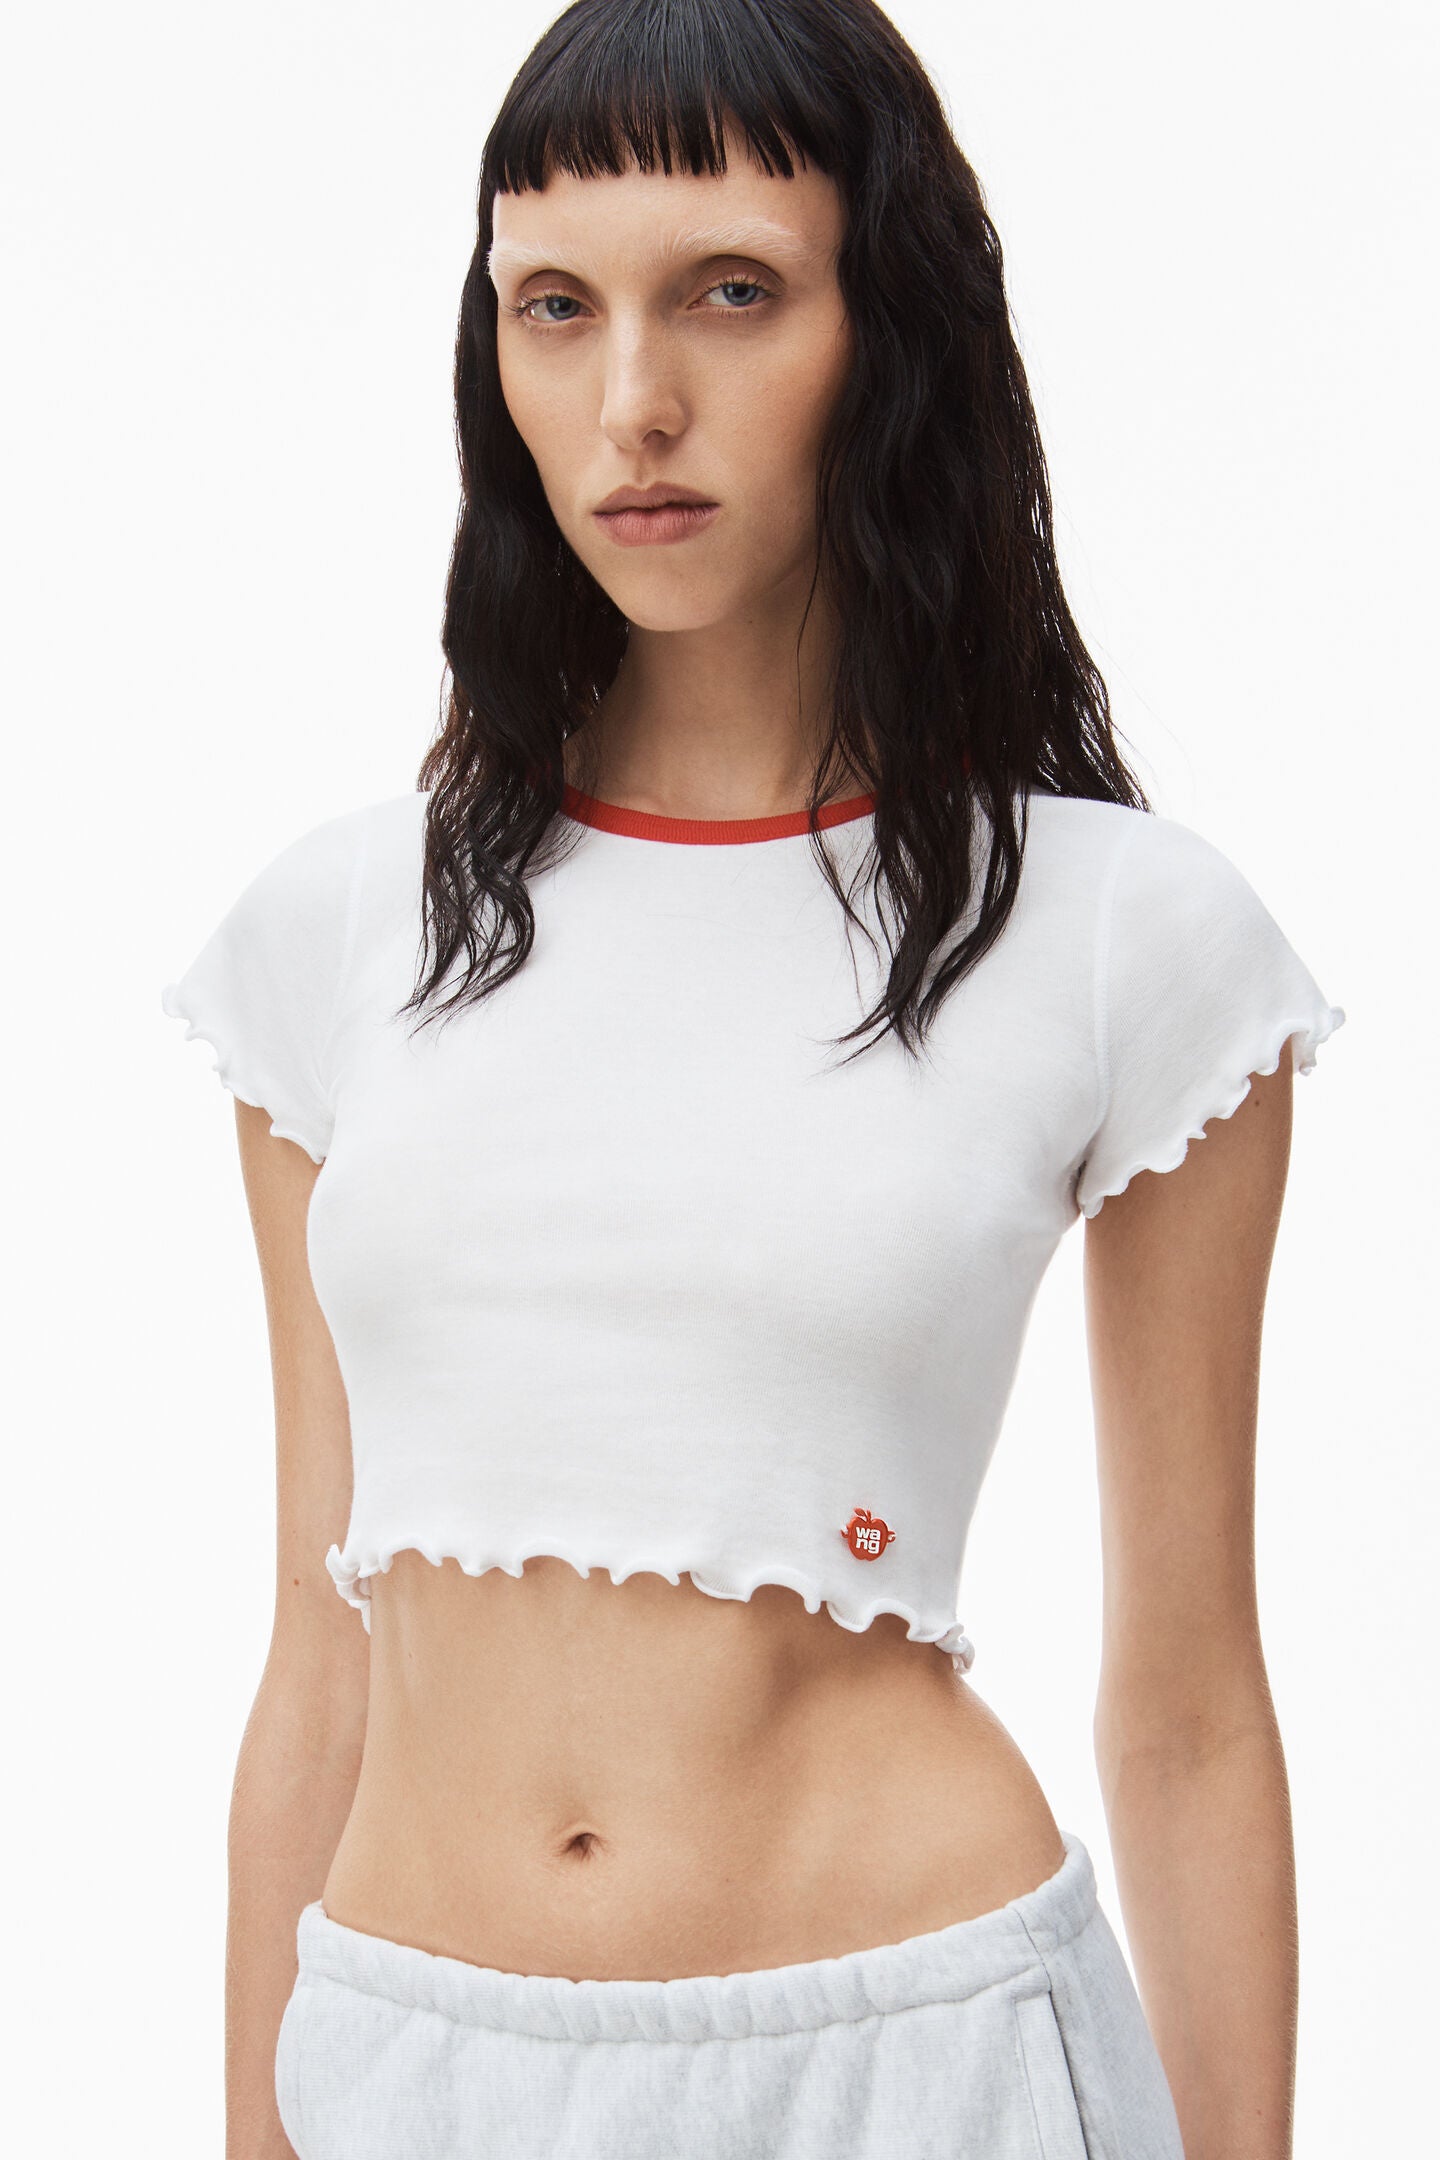 Alexander Wang Lettuce Hem Crew Neck Baby Tee in White available at The New Trend Australia